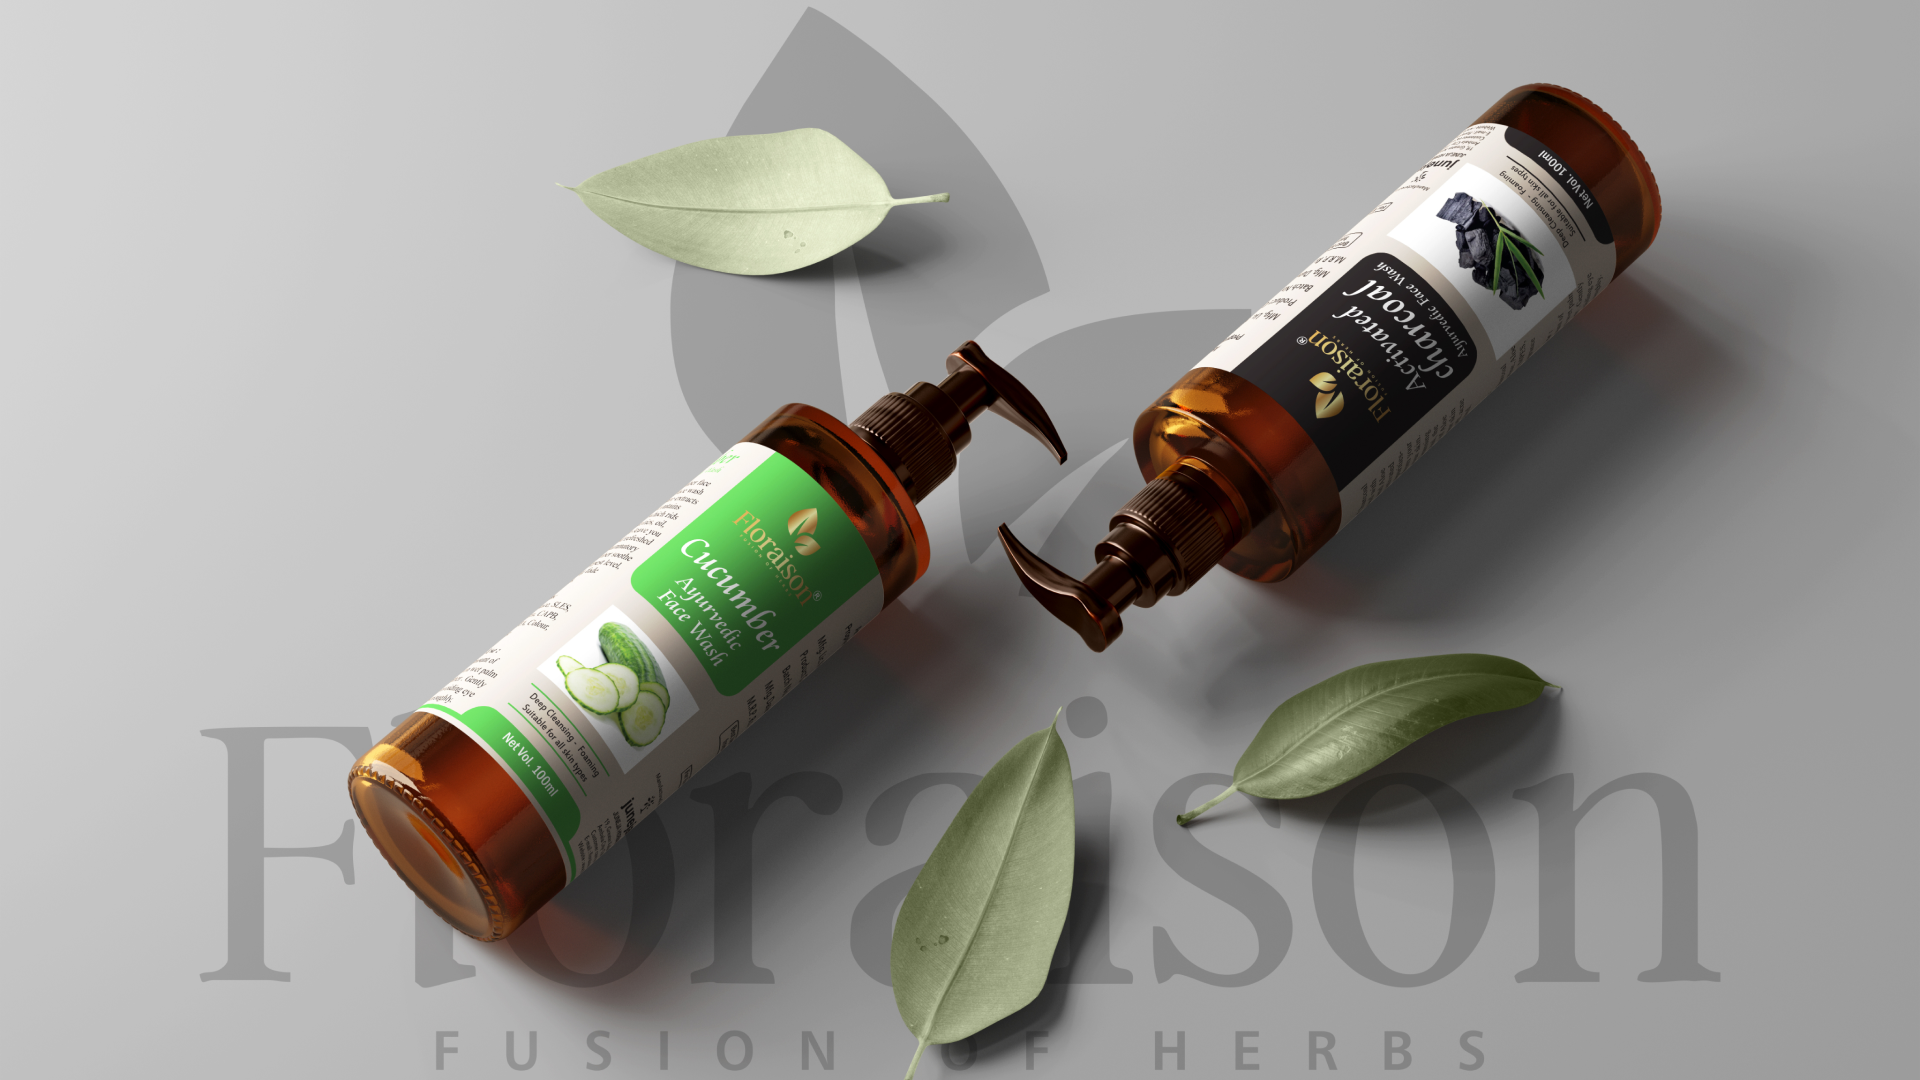 Florison's herbal products crafted from premium herbs. grow your brand with ecommerce seo services